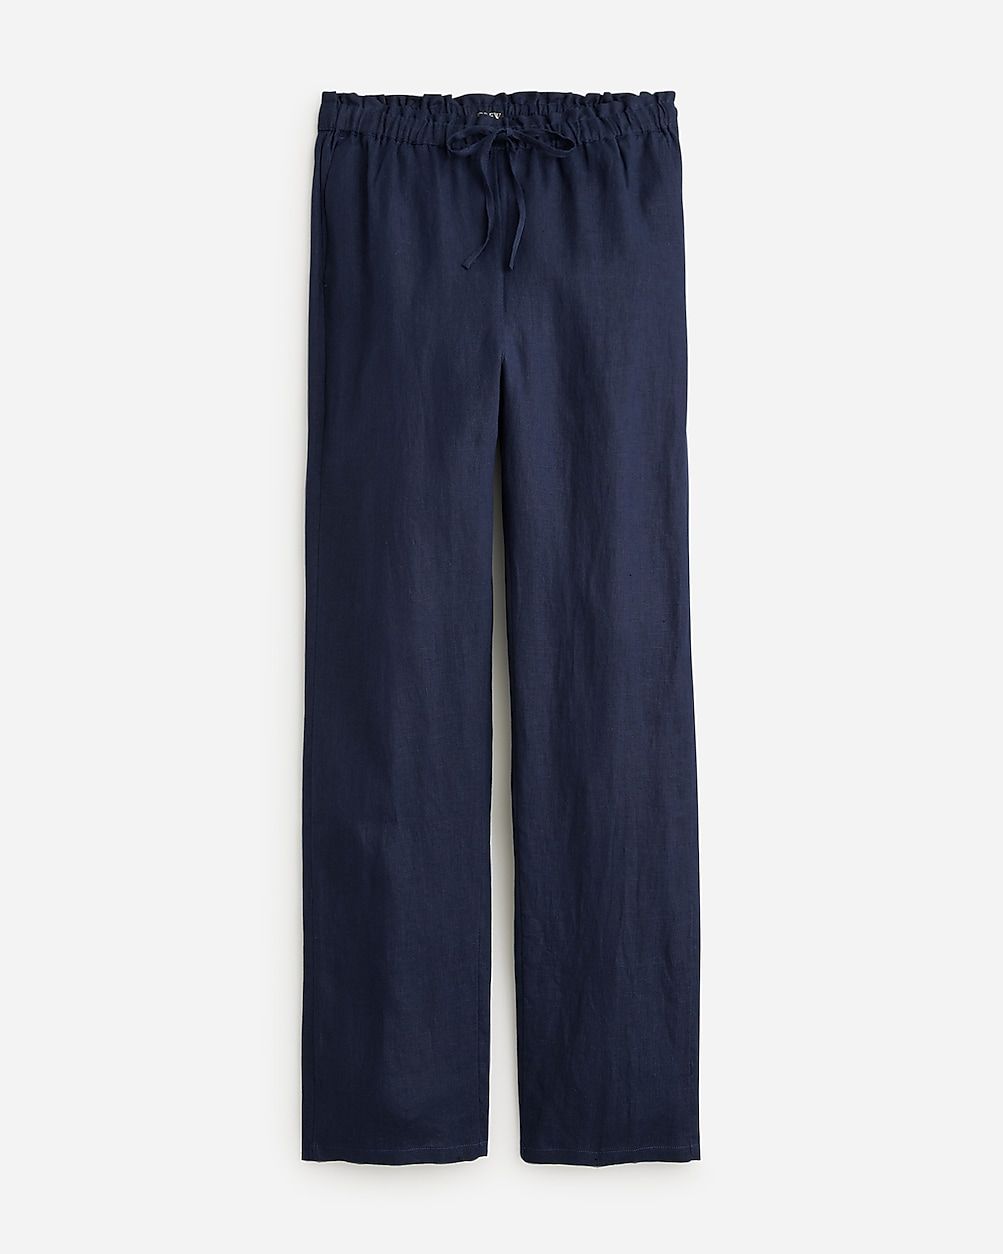 new color4.2(120 REVIEWS)Soleil pant in linen$98.00NavyClassicPetiteTallSelect a sizeSize & Fit I... | J.Crew US